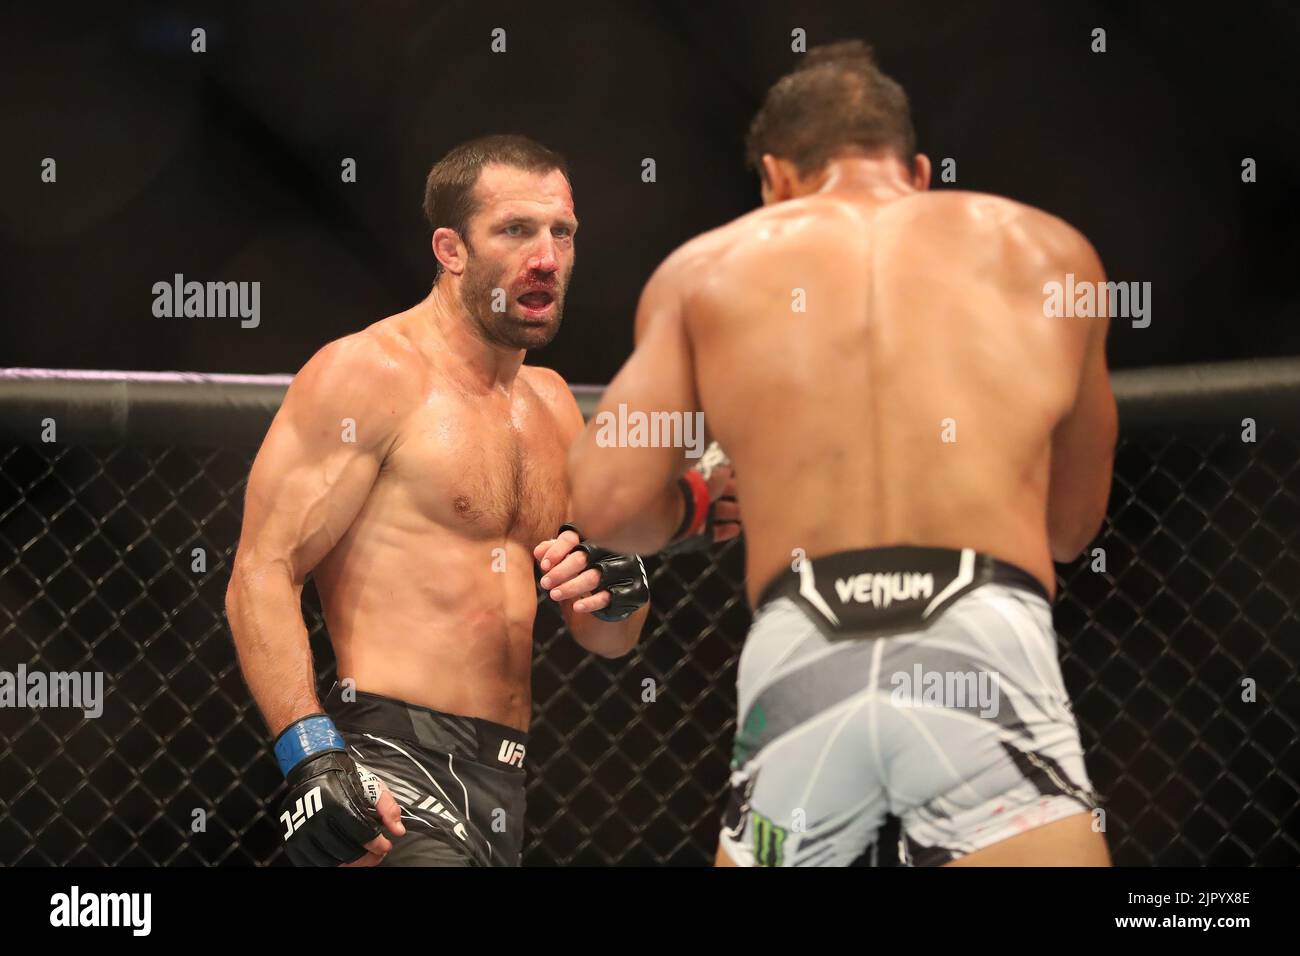 Salt Lake City, United States. 20th Aug, 2022. SALT LAKE CITY, UT - AUGUST 20: (L-R) Luke Rockhold battles Paulo Costa in their Middleweight bout during the UFC 278 at the Vivint Arena on August 20, 2022 in Salt Lake City, Utah, United States. (Photo by Alejandro Salazar/PxImages) Credit: Px Images/Alamy Live News Stock Photo